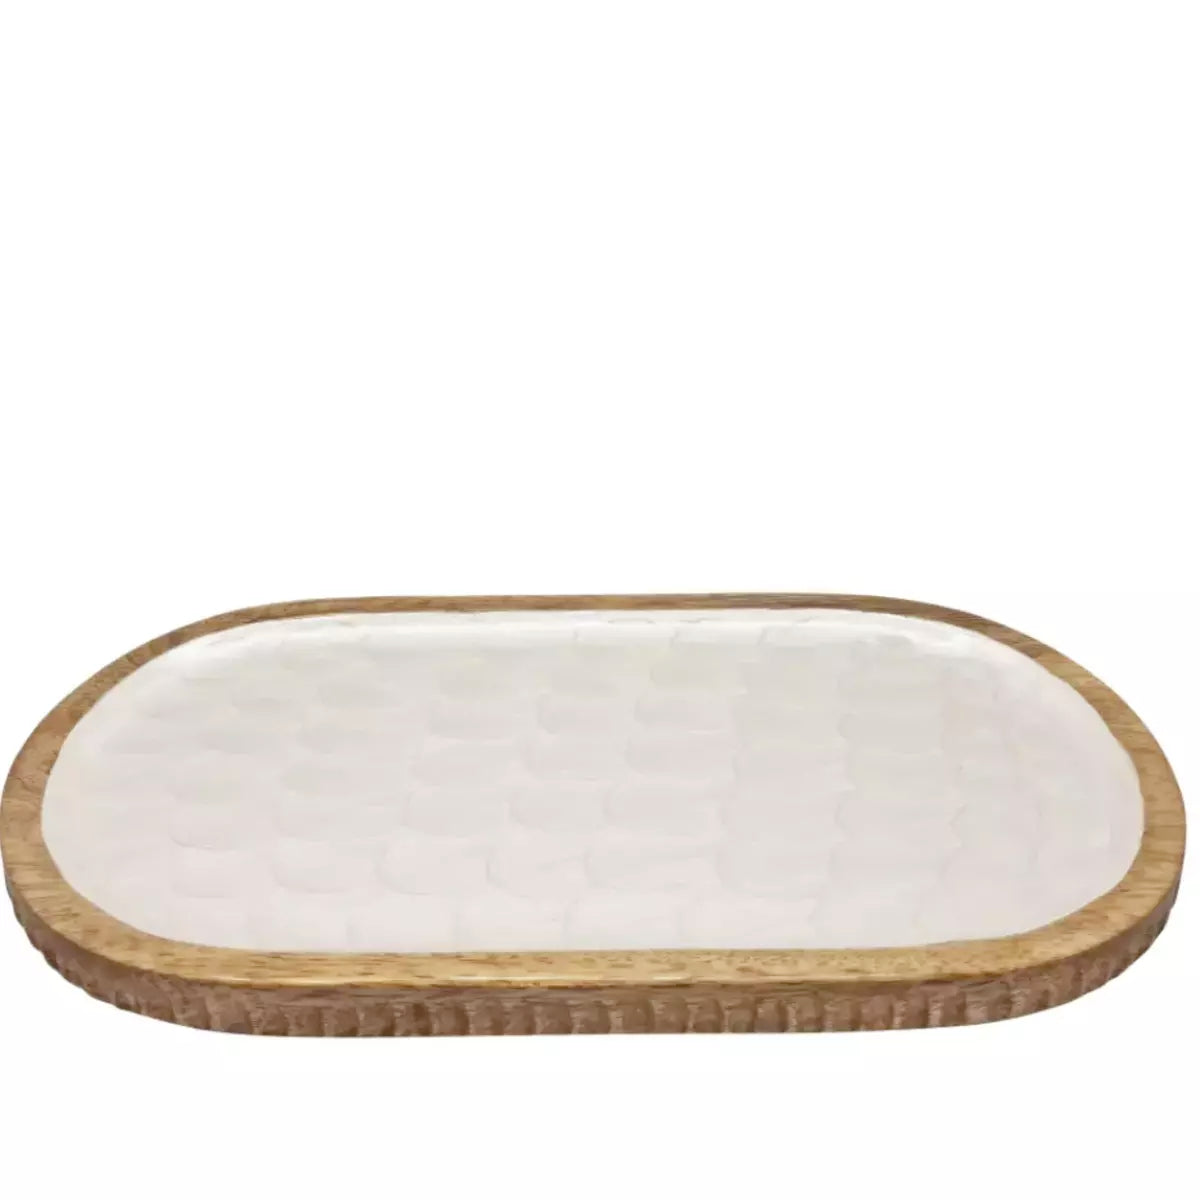 A white oval tray with a wooden base featuring an embossed pearl design, the Como Oval Serving Tray by j.elliot.